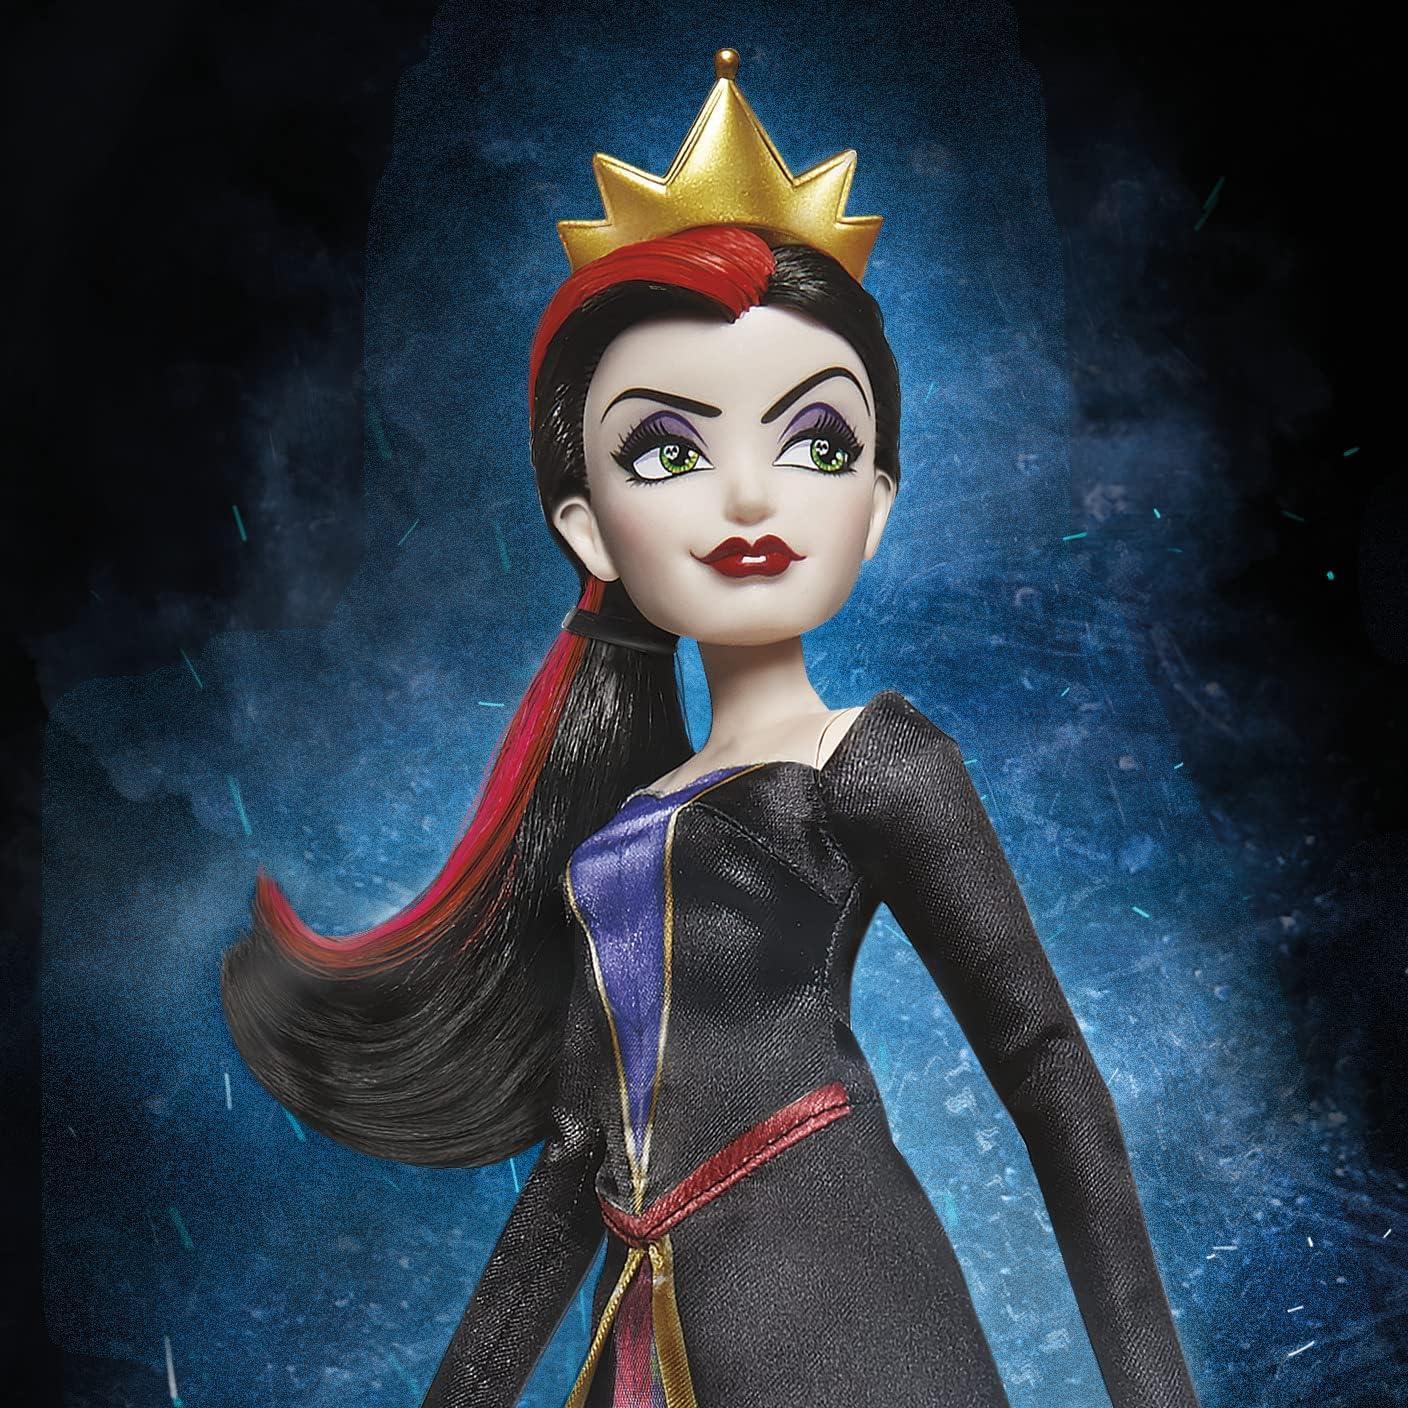 Disney Villains Evil Queen Fashion Doll, Accessories and Removable Clothes - BumbleToys - 4+ Years, 5-7 Years, Characters, Disney, Disney Princess, Dolls, Fashion Dolls & Accessories, Girls, Pre-Order